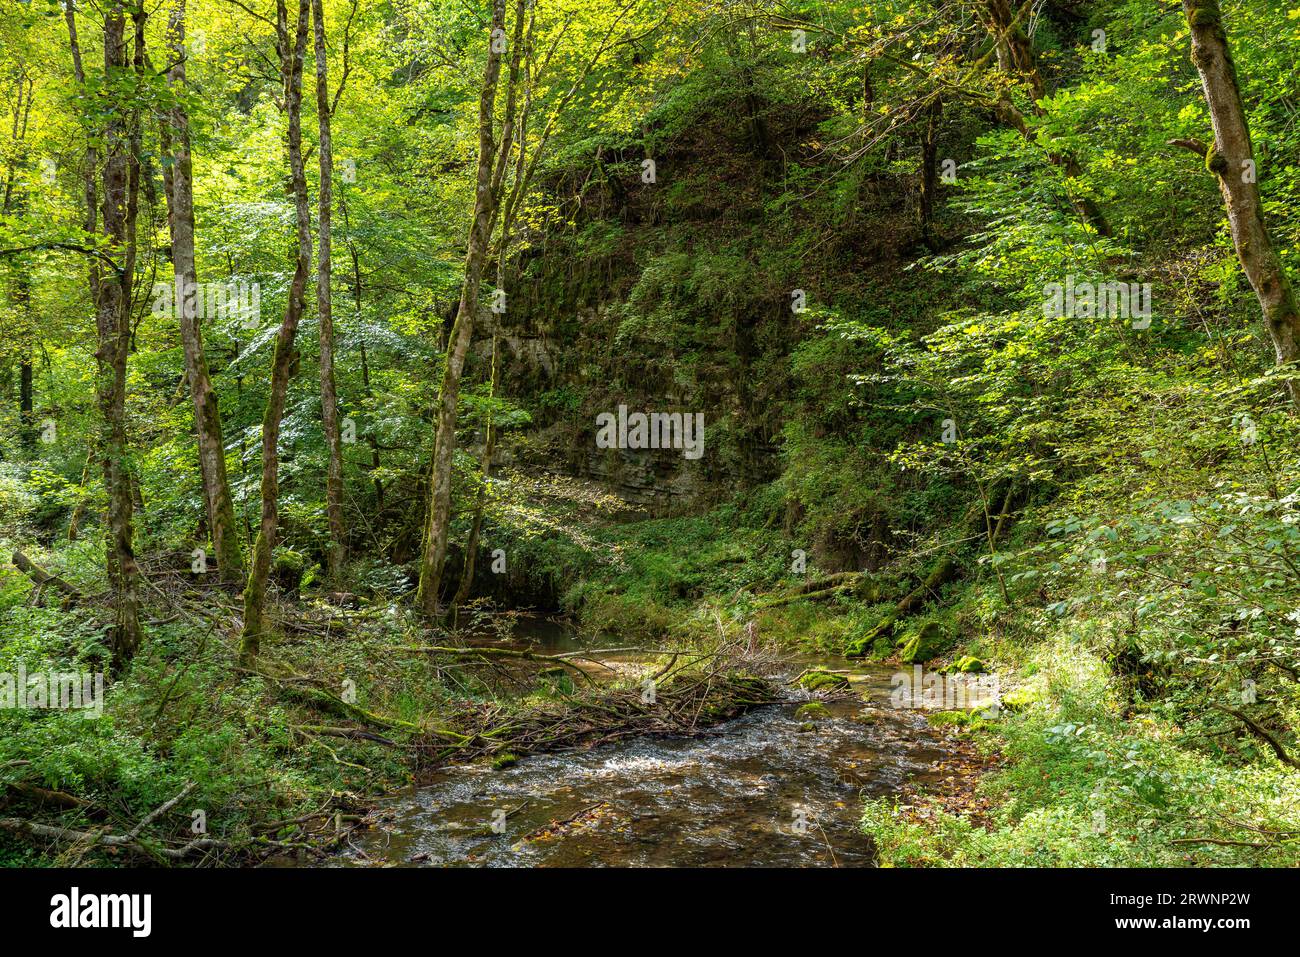 View over Gauchach river in Gauchach gorge in Black Forest, Germany Stock Photo